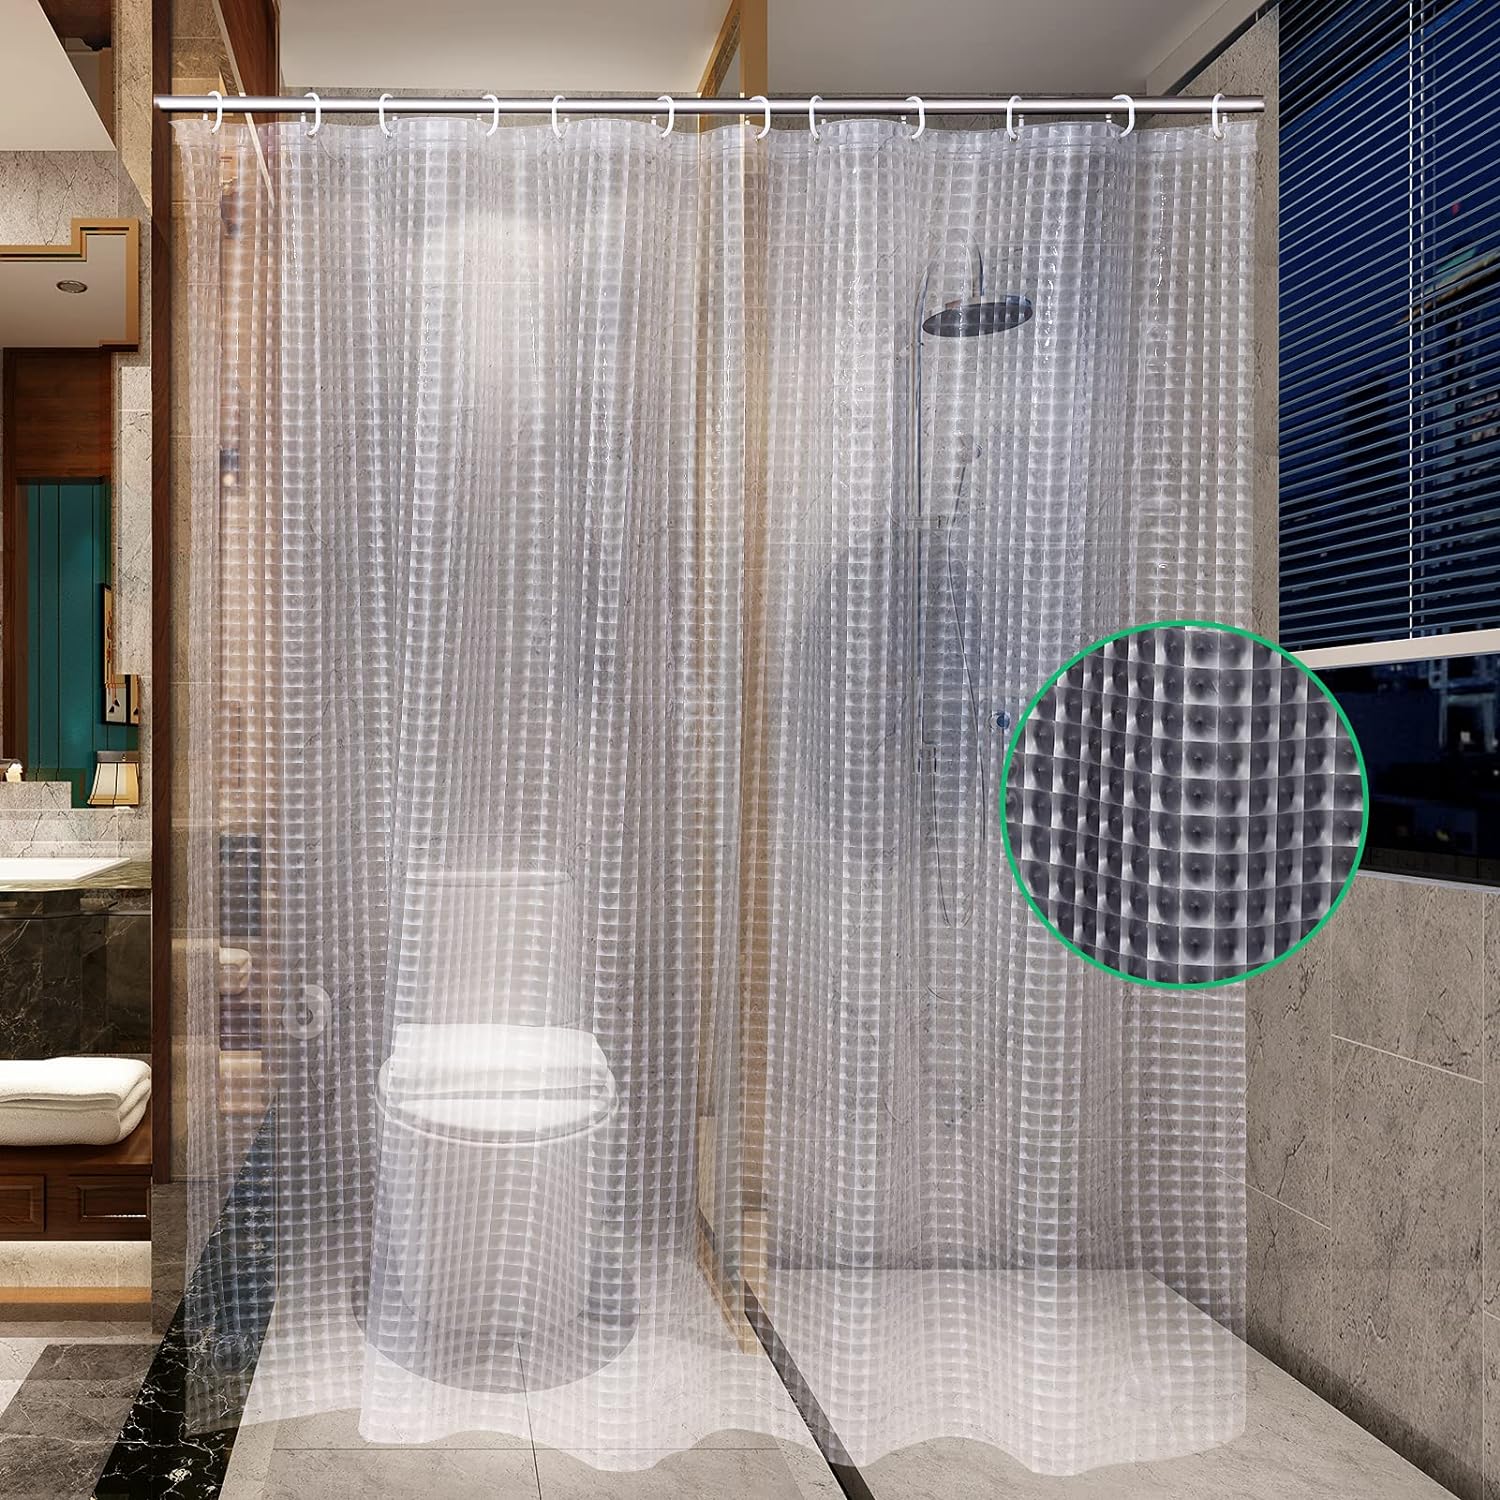 Waterproof Shower Curtain Liner 8G EVA Thick with Heavy Duty 3 Bottom Magnets, Shower Liner for Shower Stall, Bathtubs, 3D Pebble Pattern, 72 x 72,12 Hooks